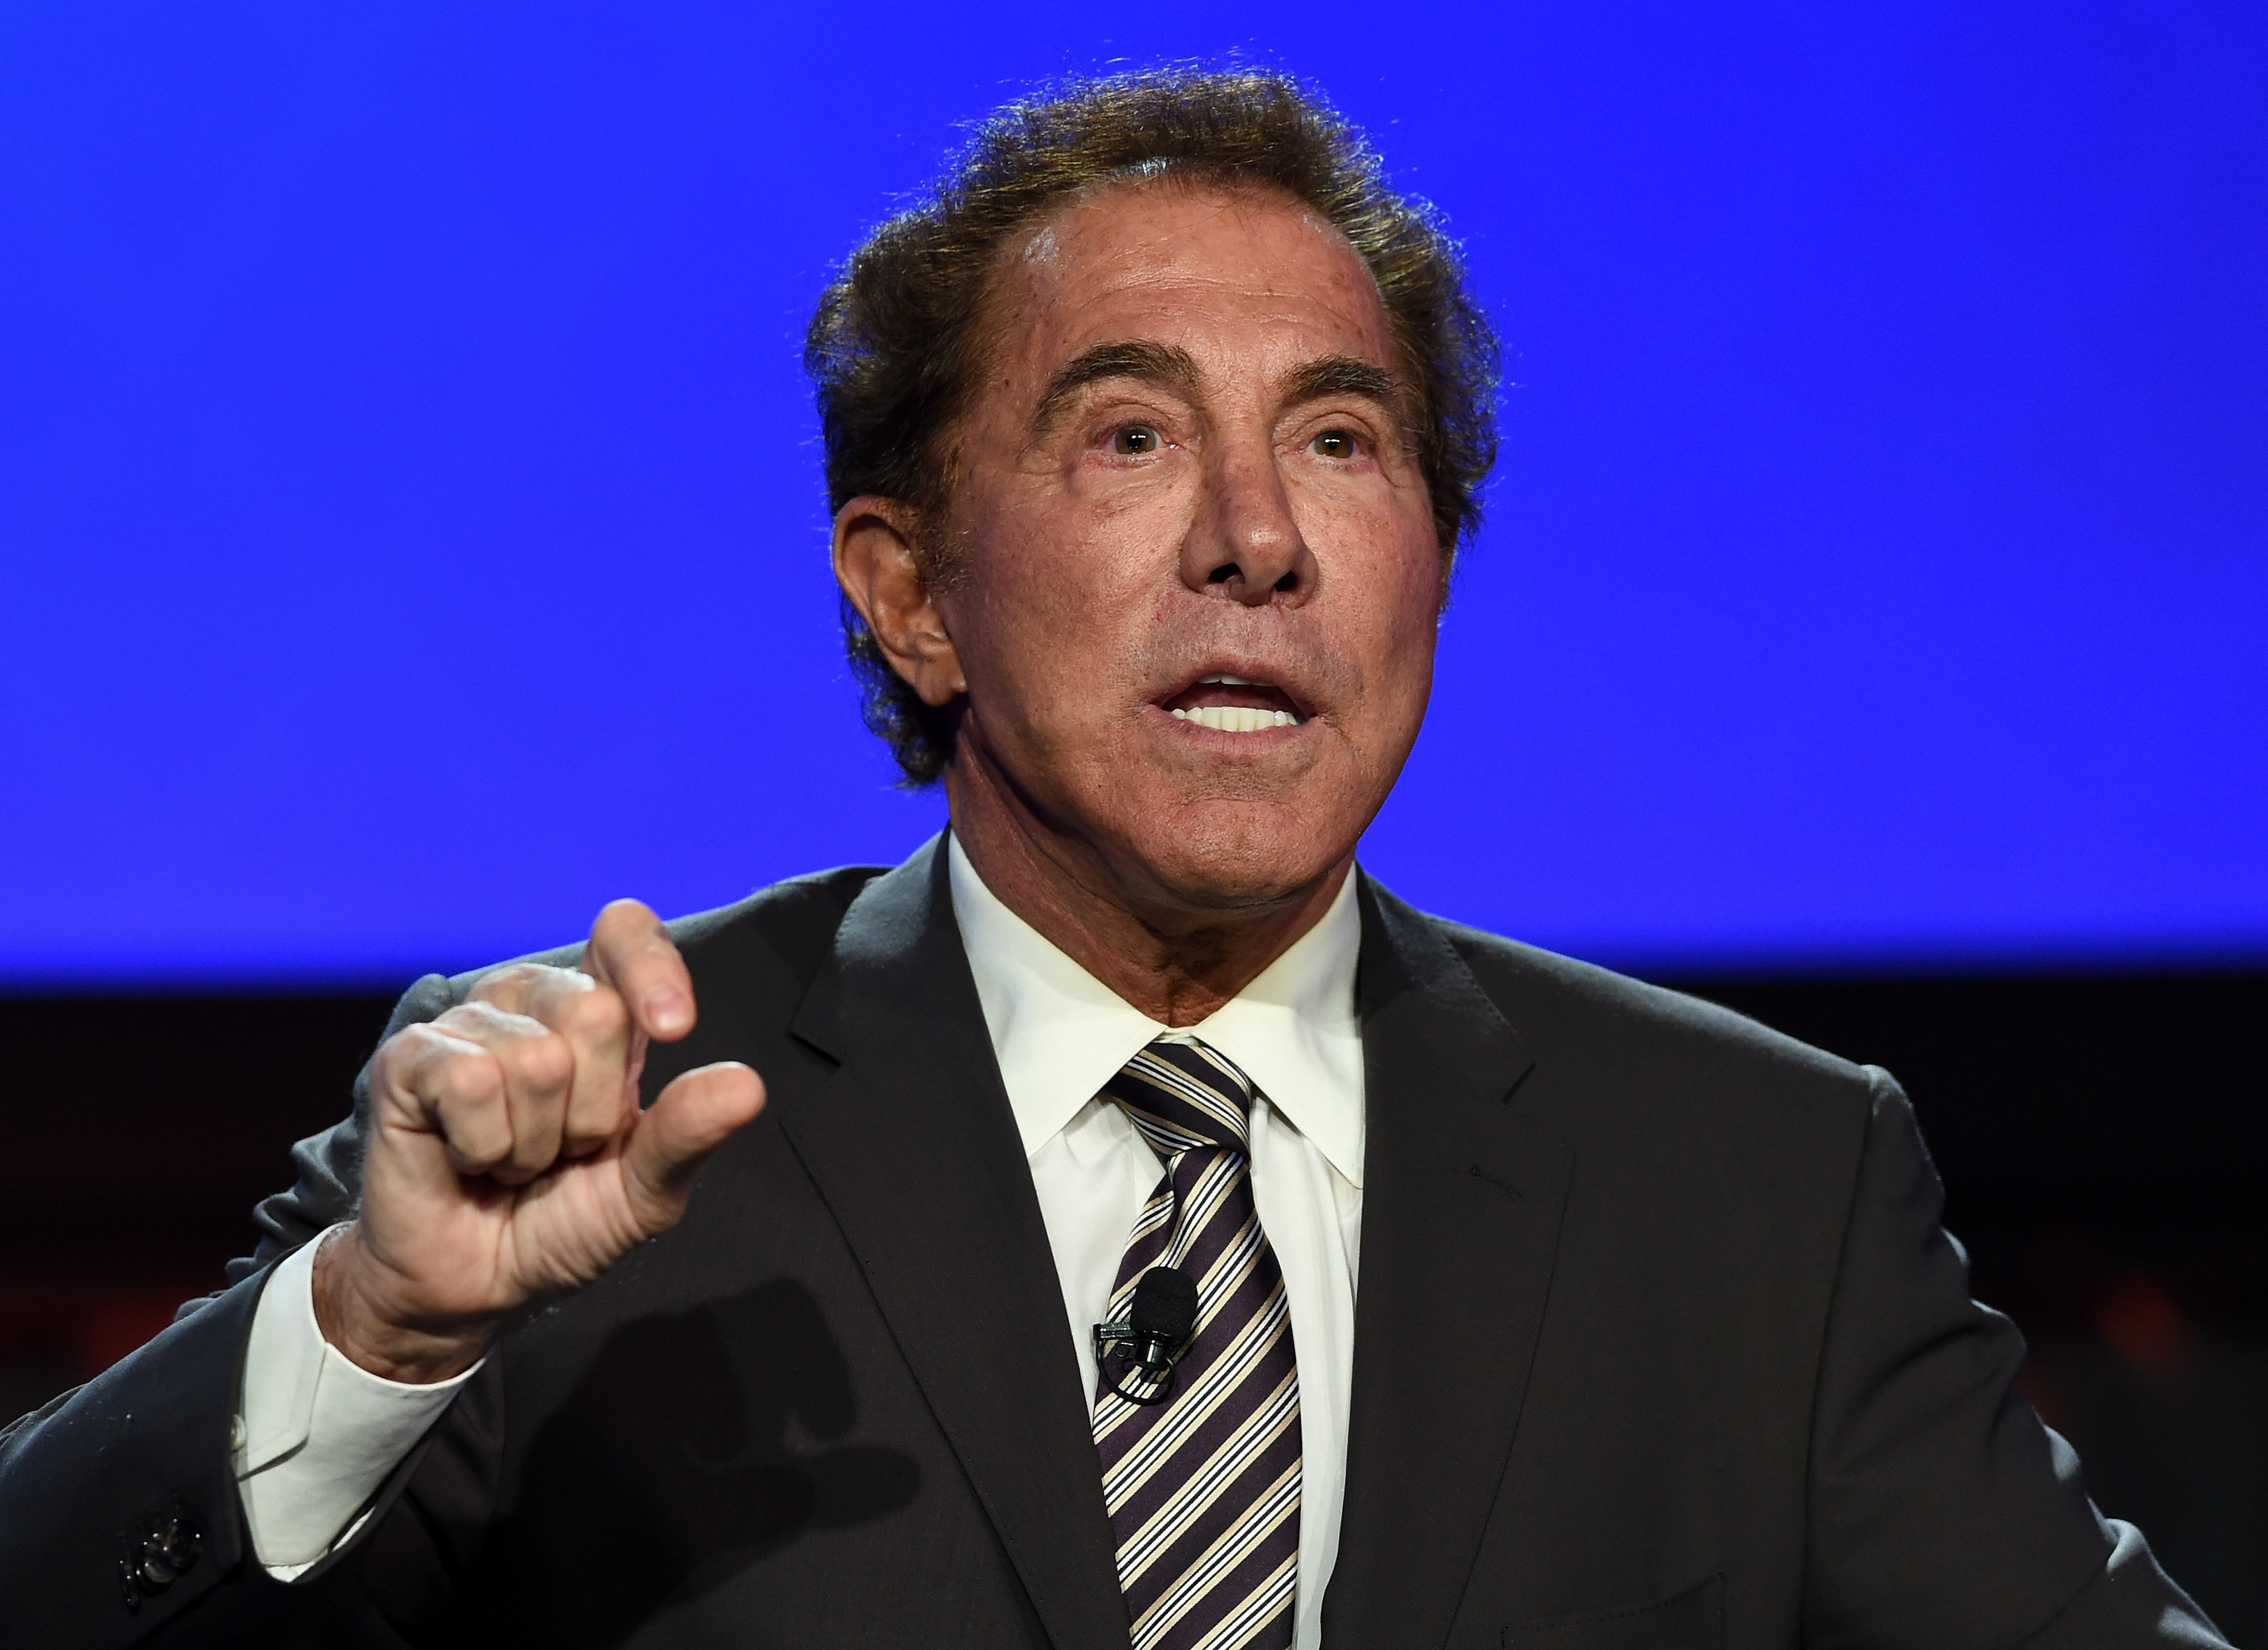 Wynn Resorts Chairman and CEO Steve Wynn speaks at the Global Gaming Expo (G2E) 2014 at The Venetian Las Vegas on September 30, 2014 in Las Vegas, Nevada. (Ethan Miller—Getty Images)